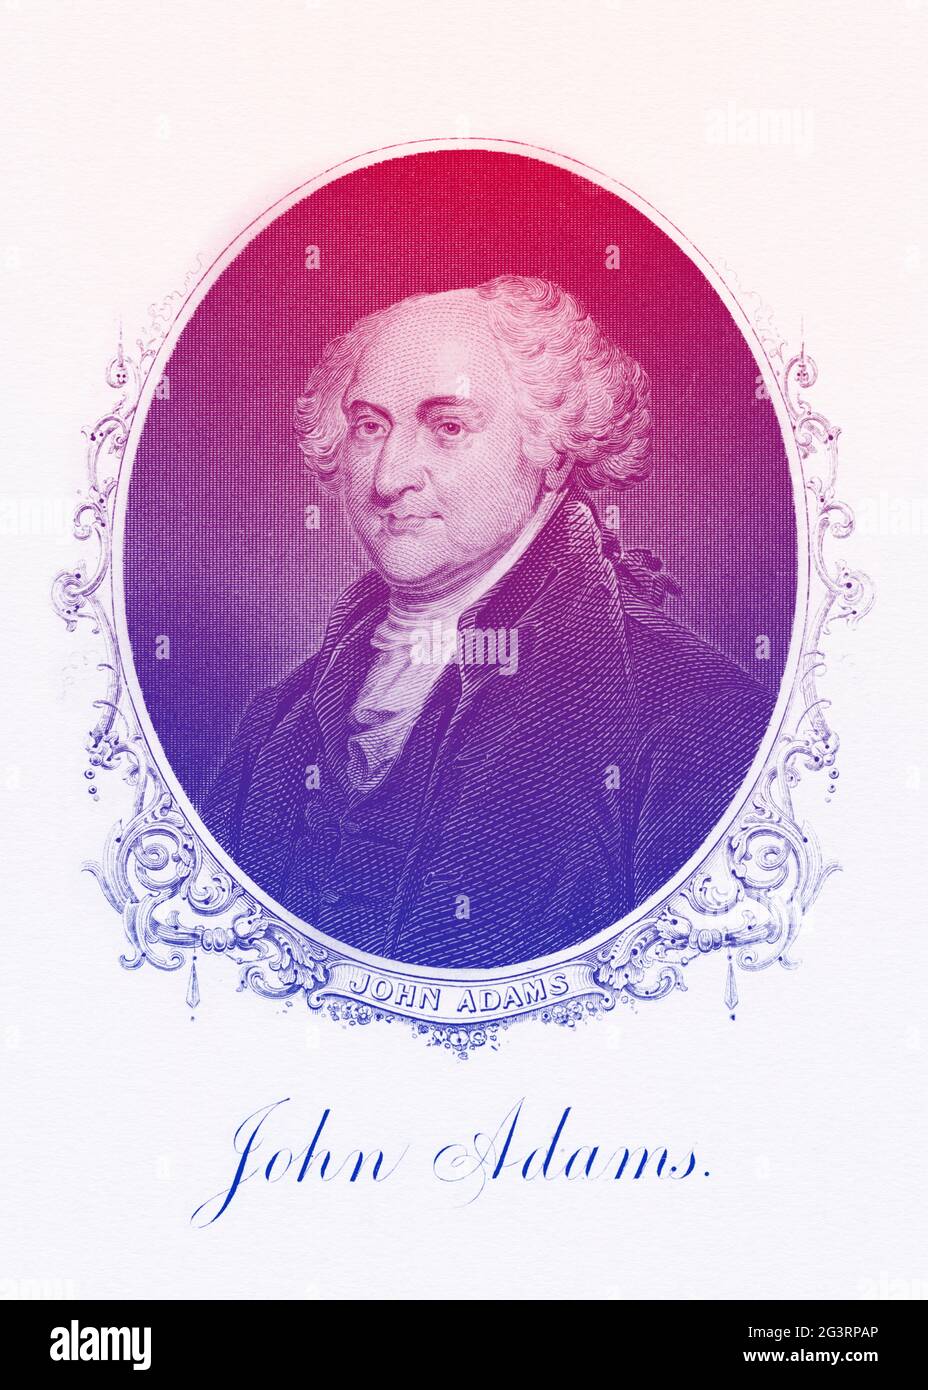 John Adams, 2nd President of the United States Stock Photo